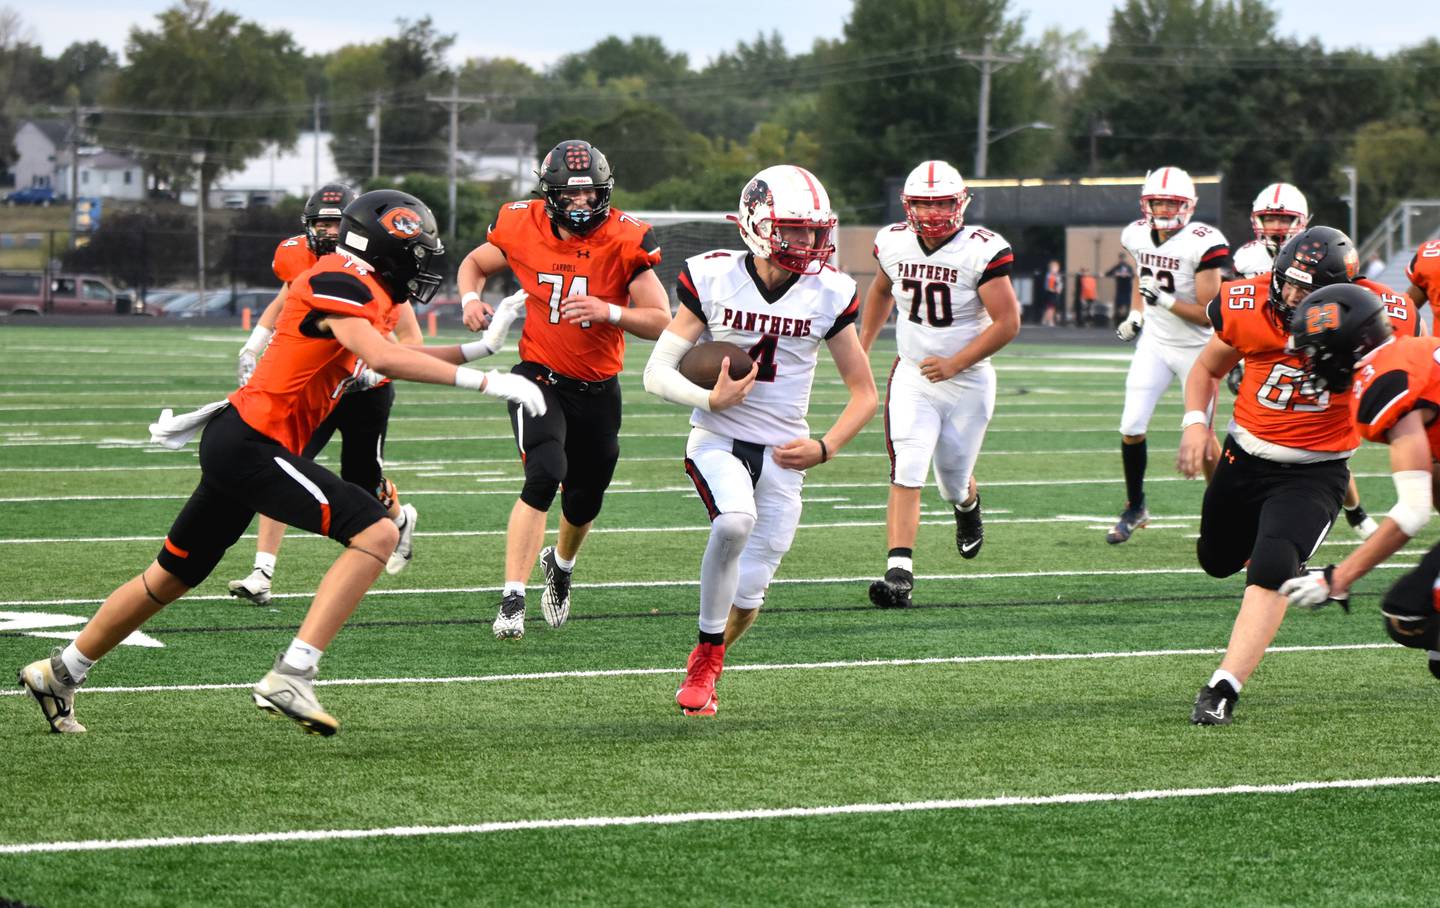 Creston senior Cael Turner evades defenders for the first touchdown of the game, a 7-yard quarterback keeper. Turner threw 11-12 for 431 yards and five touchdowns.